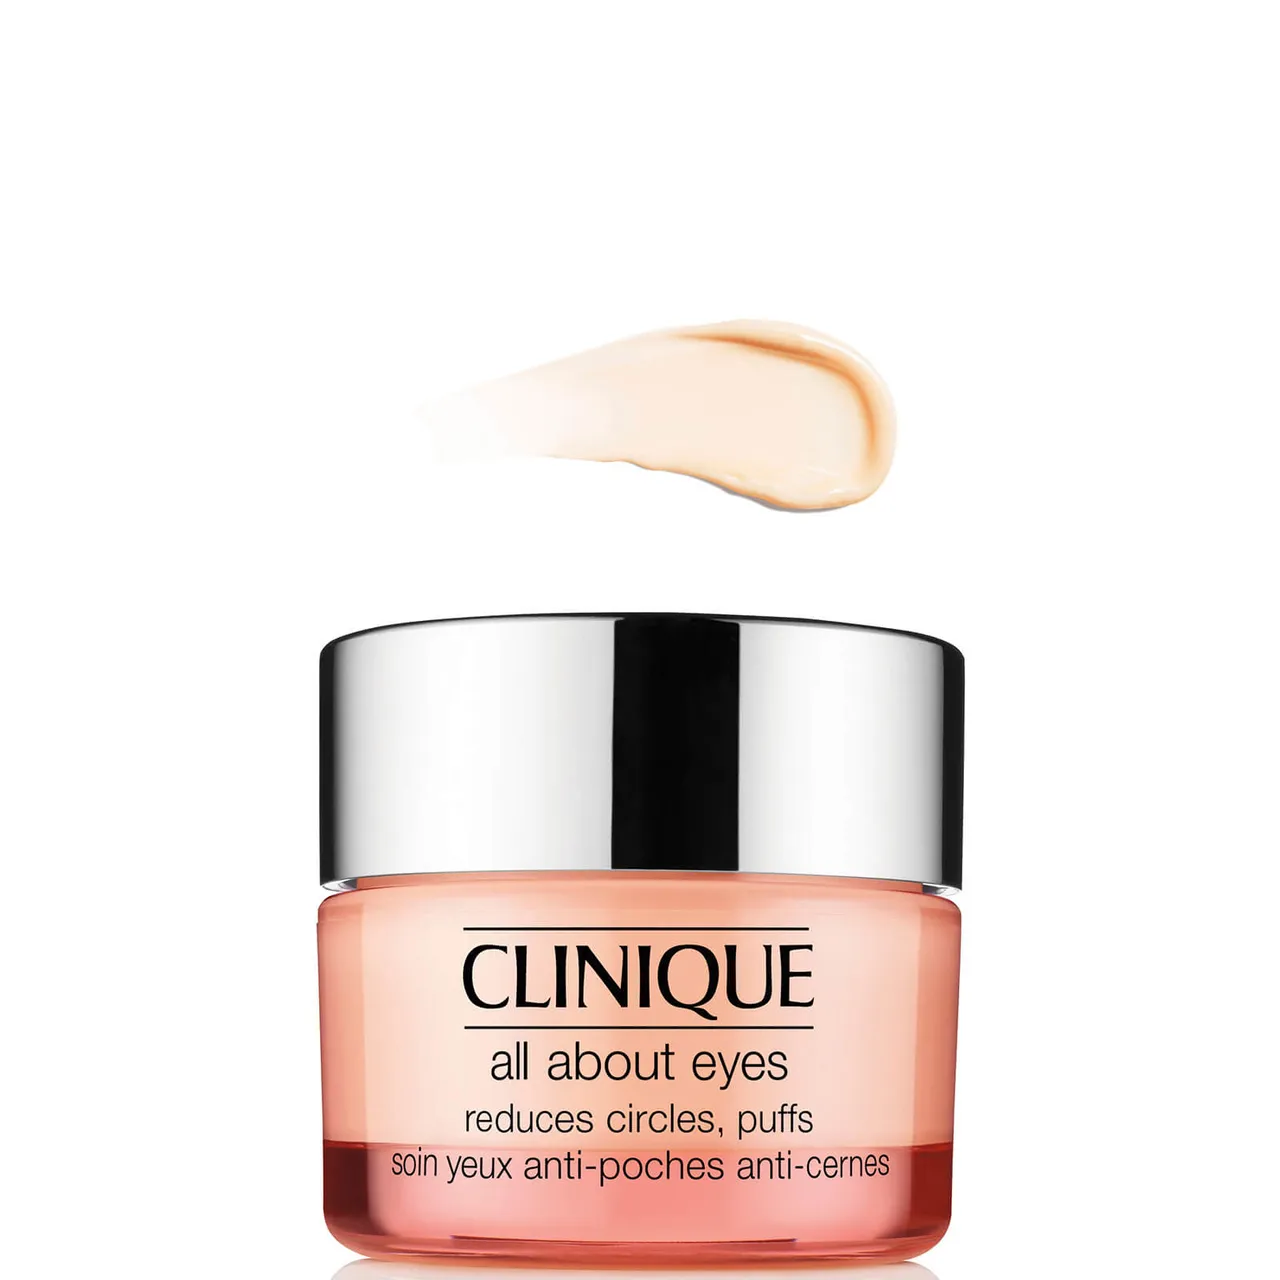 Clinique All About Eyes Augencreme 15ml